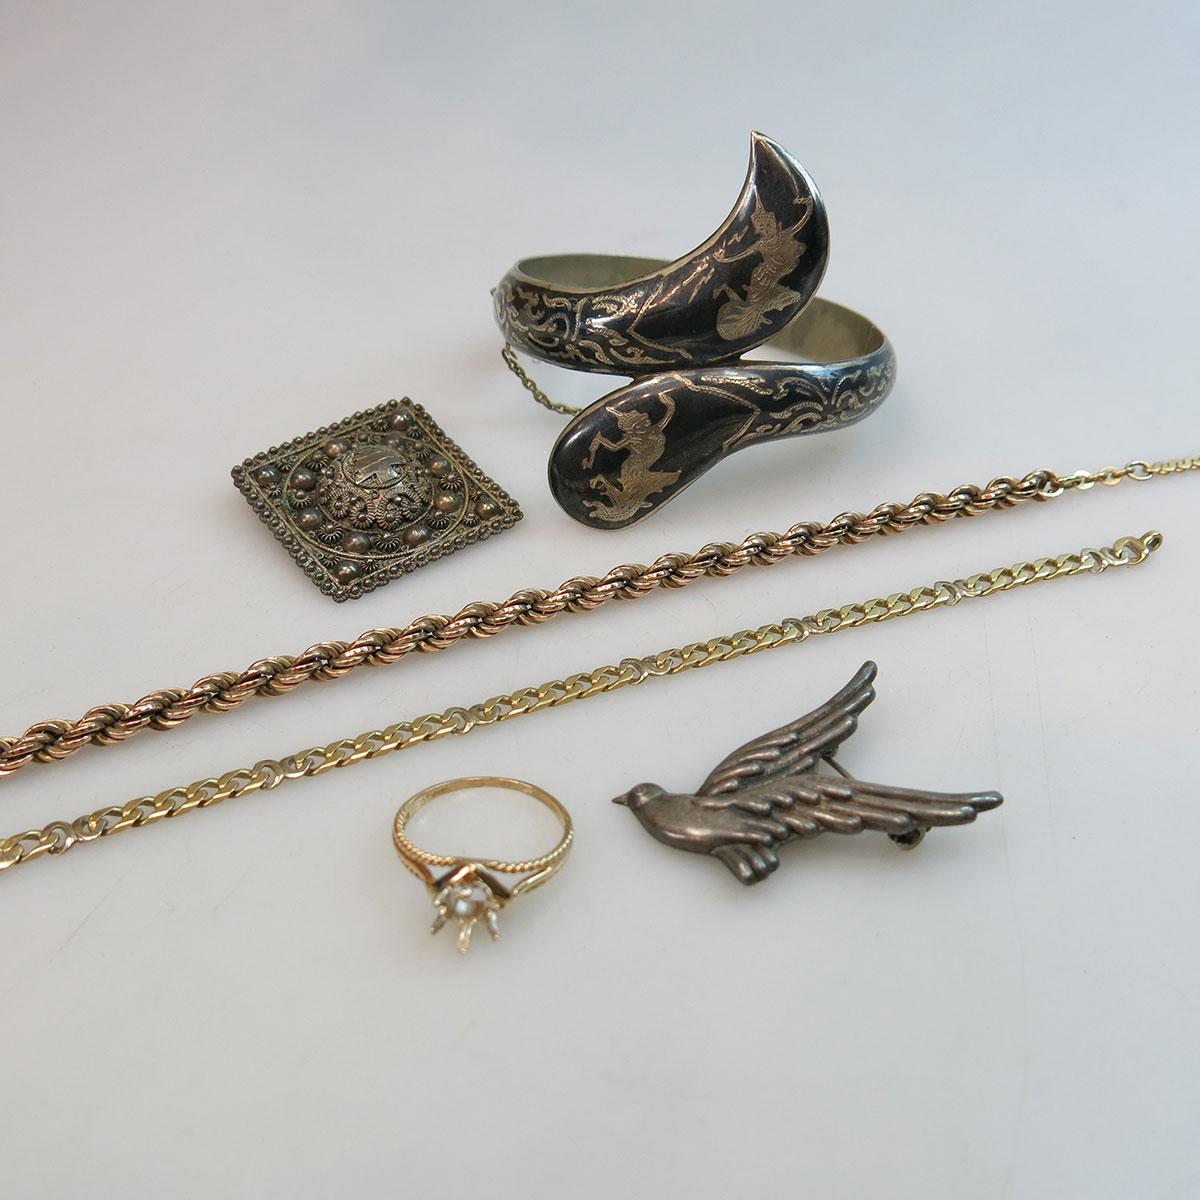 Small Quantity Of Gold And Silver Jewellery